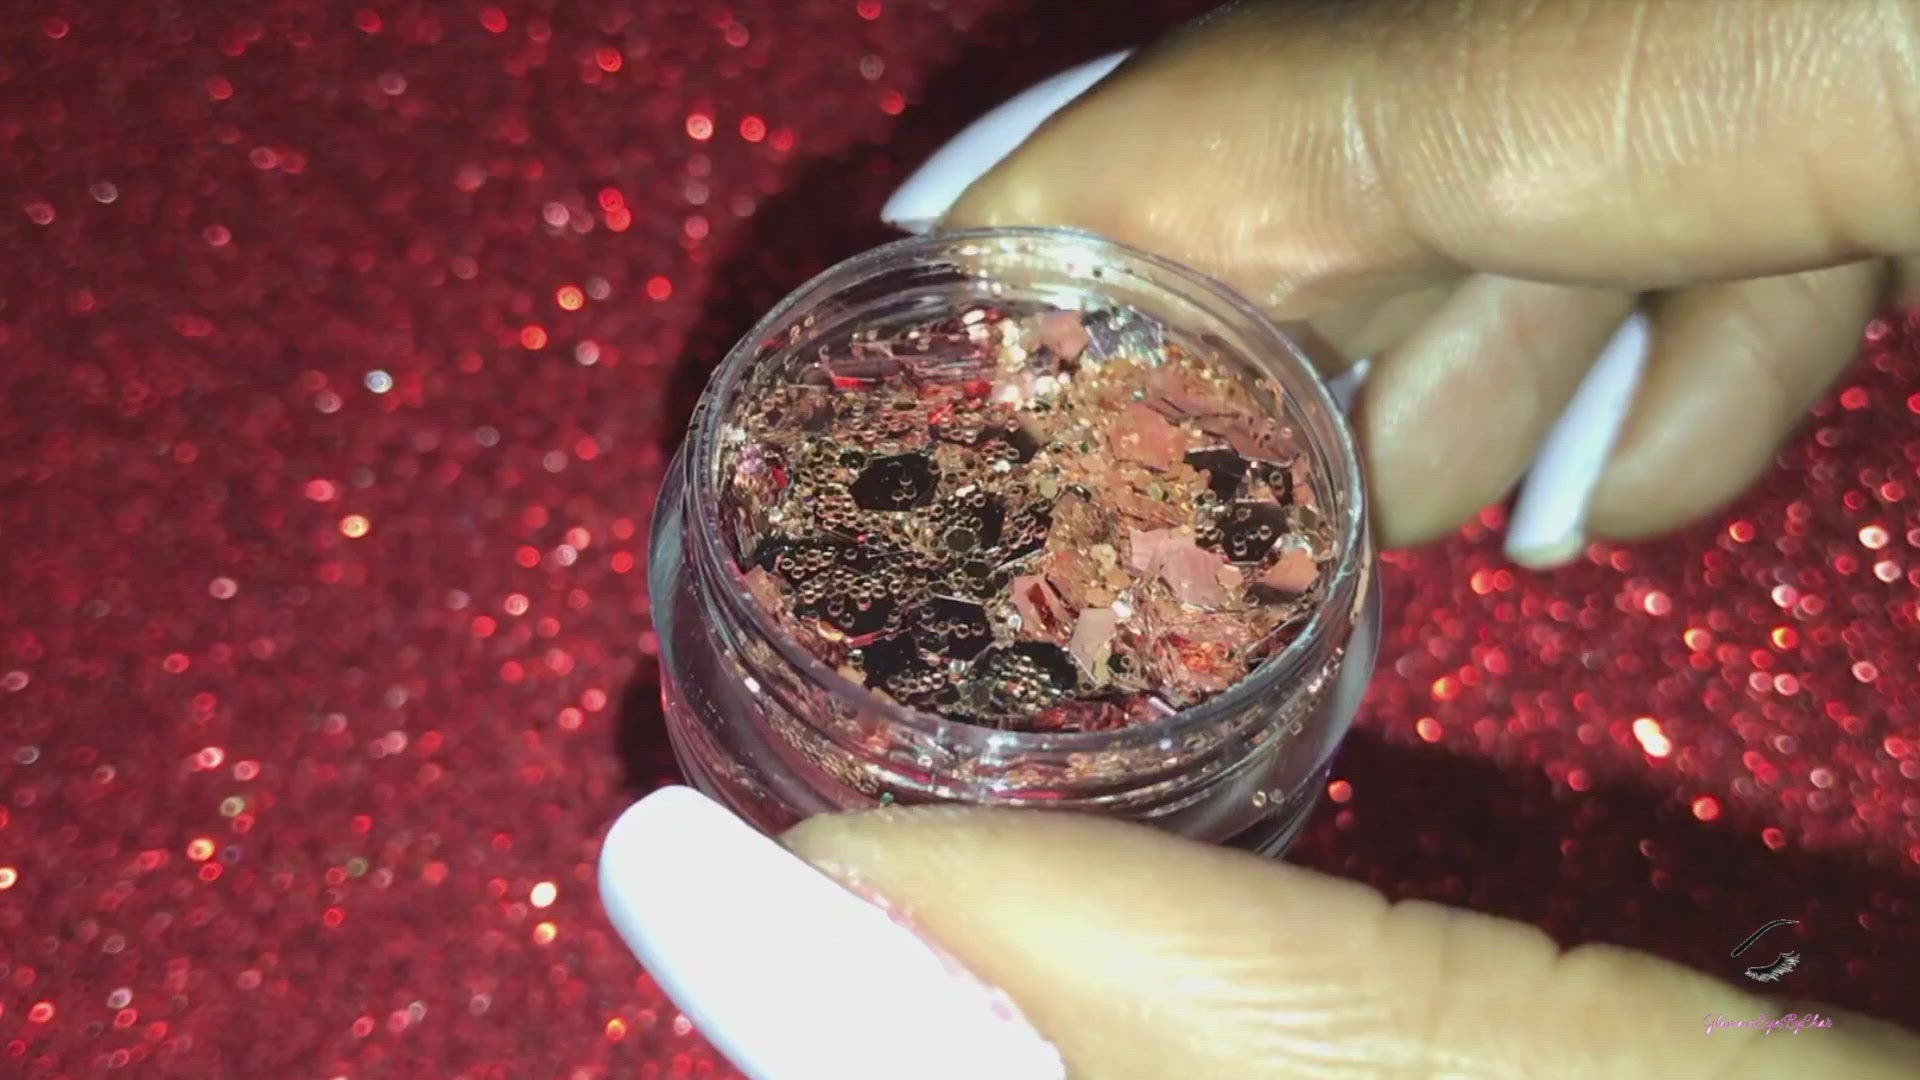 This glitter is called Rosé and is part of the super chunky glitter collection. It consists of rose gold and champagne glitter and has a dazzling sparkle.  Rosé can be used for your face, body, nails and hair. Comes in 5g and 10g jars.